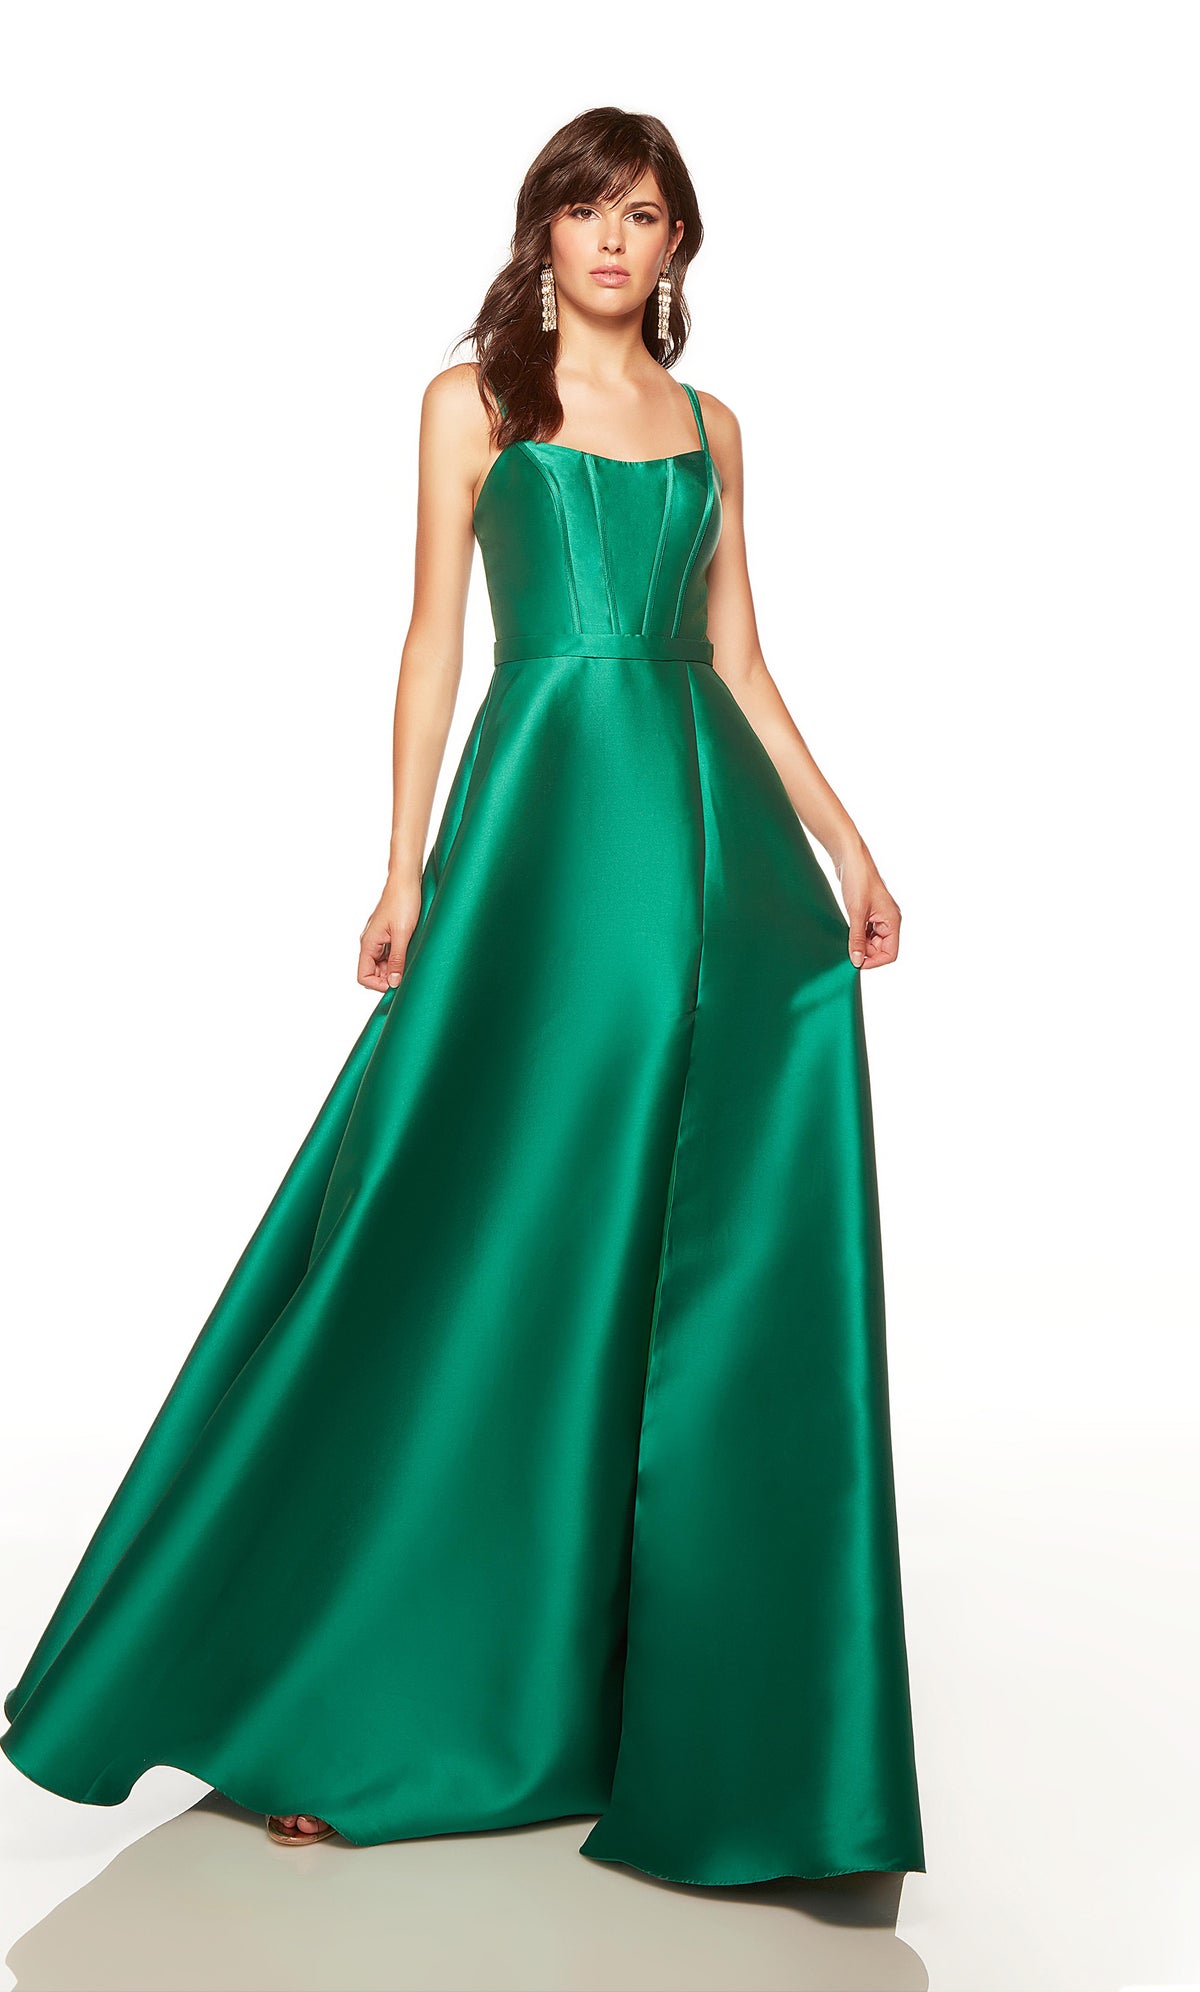 Long formal dress with a scooped neck, corset bodice, belt, and side slit in emerald green.